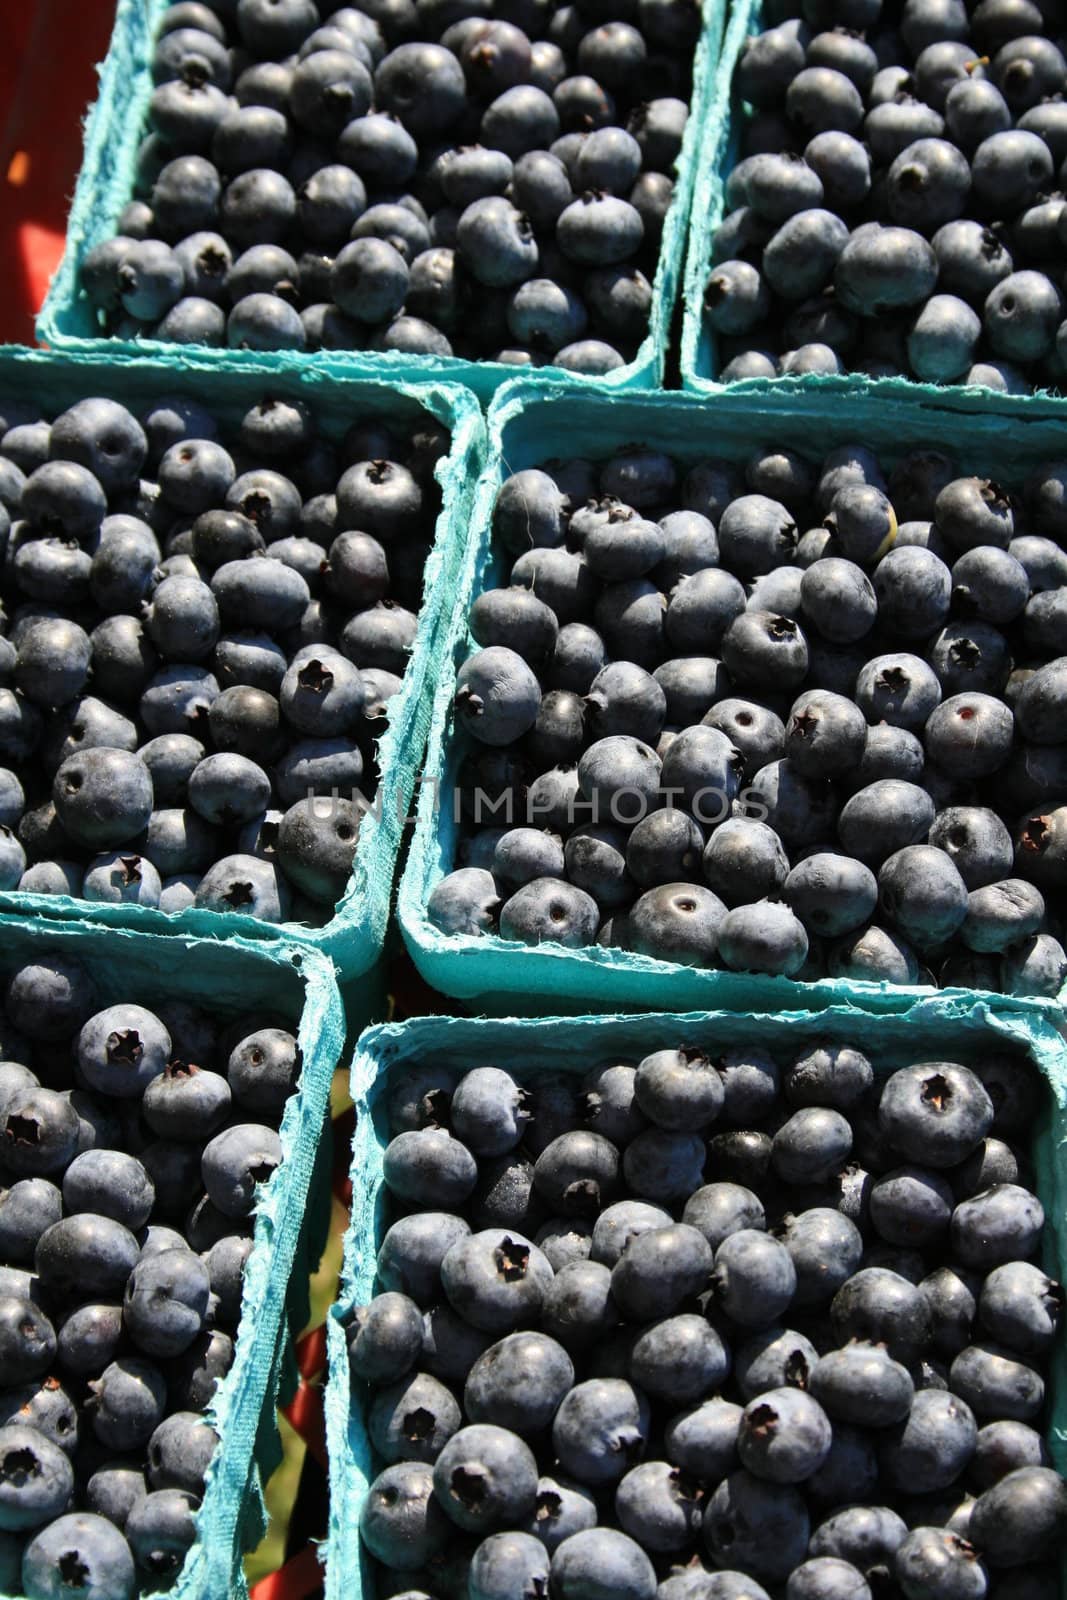 Blueberries for Sale by loongirl